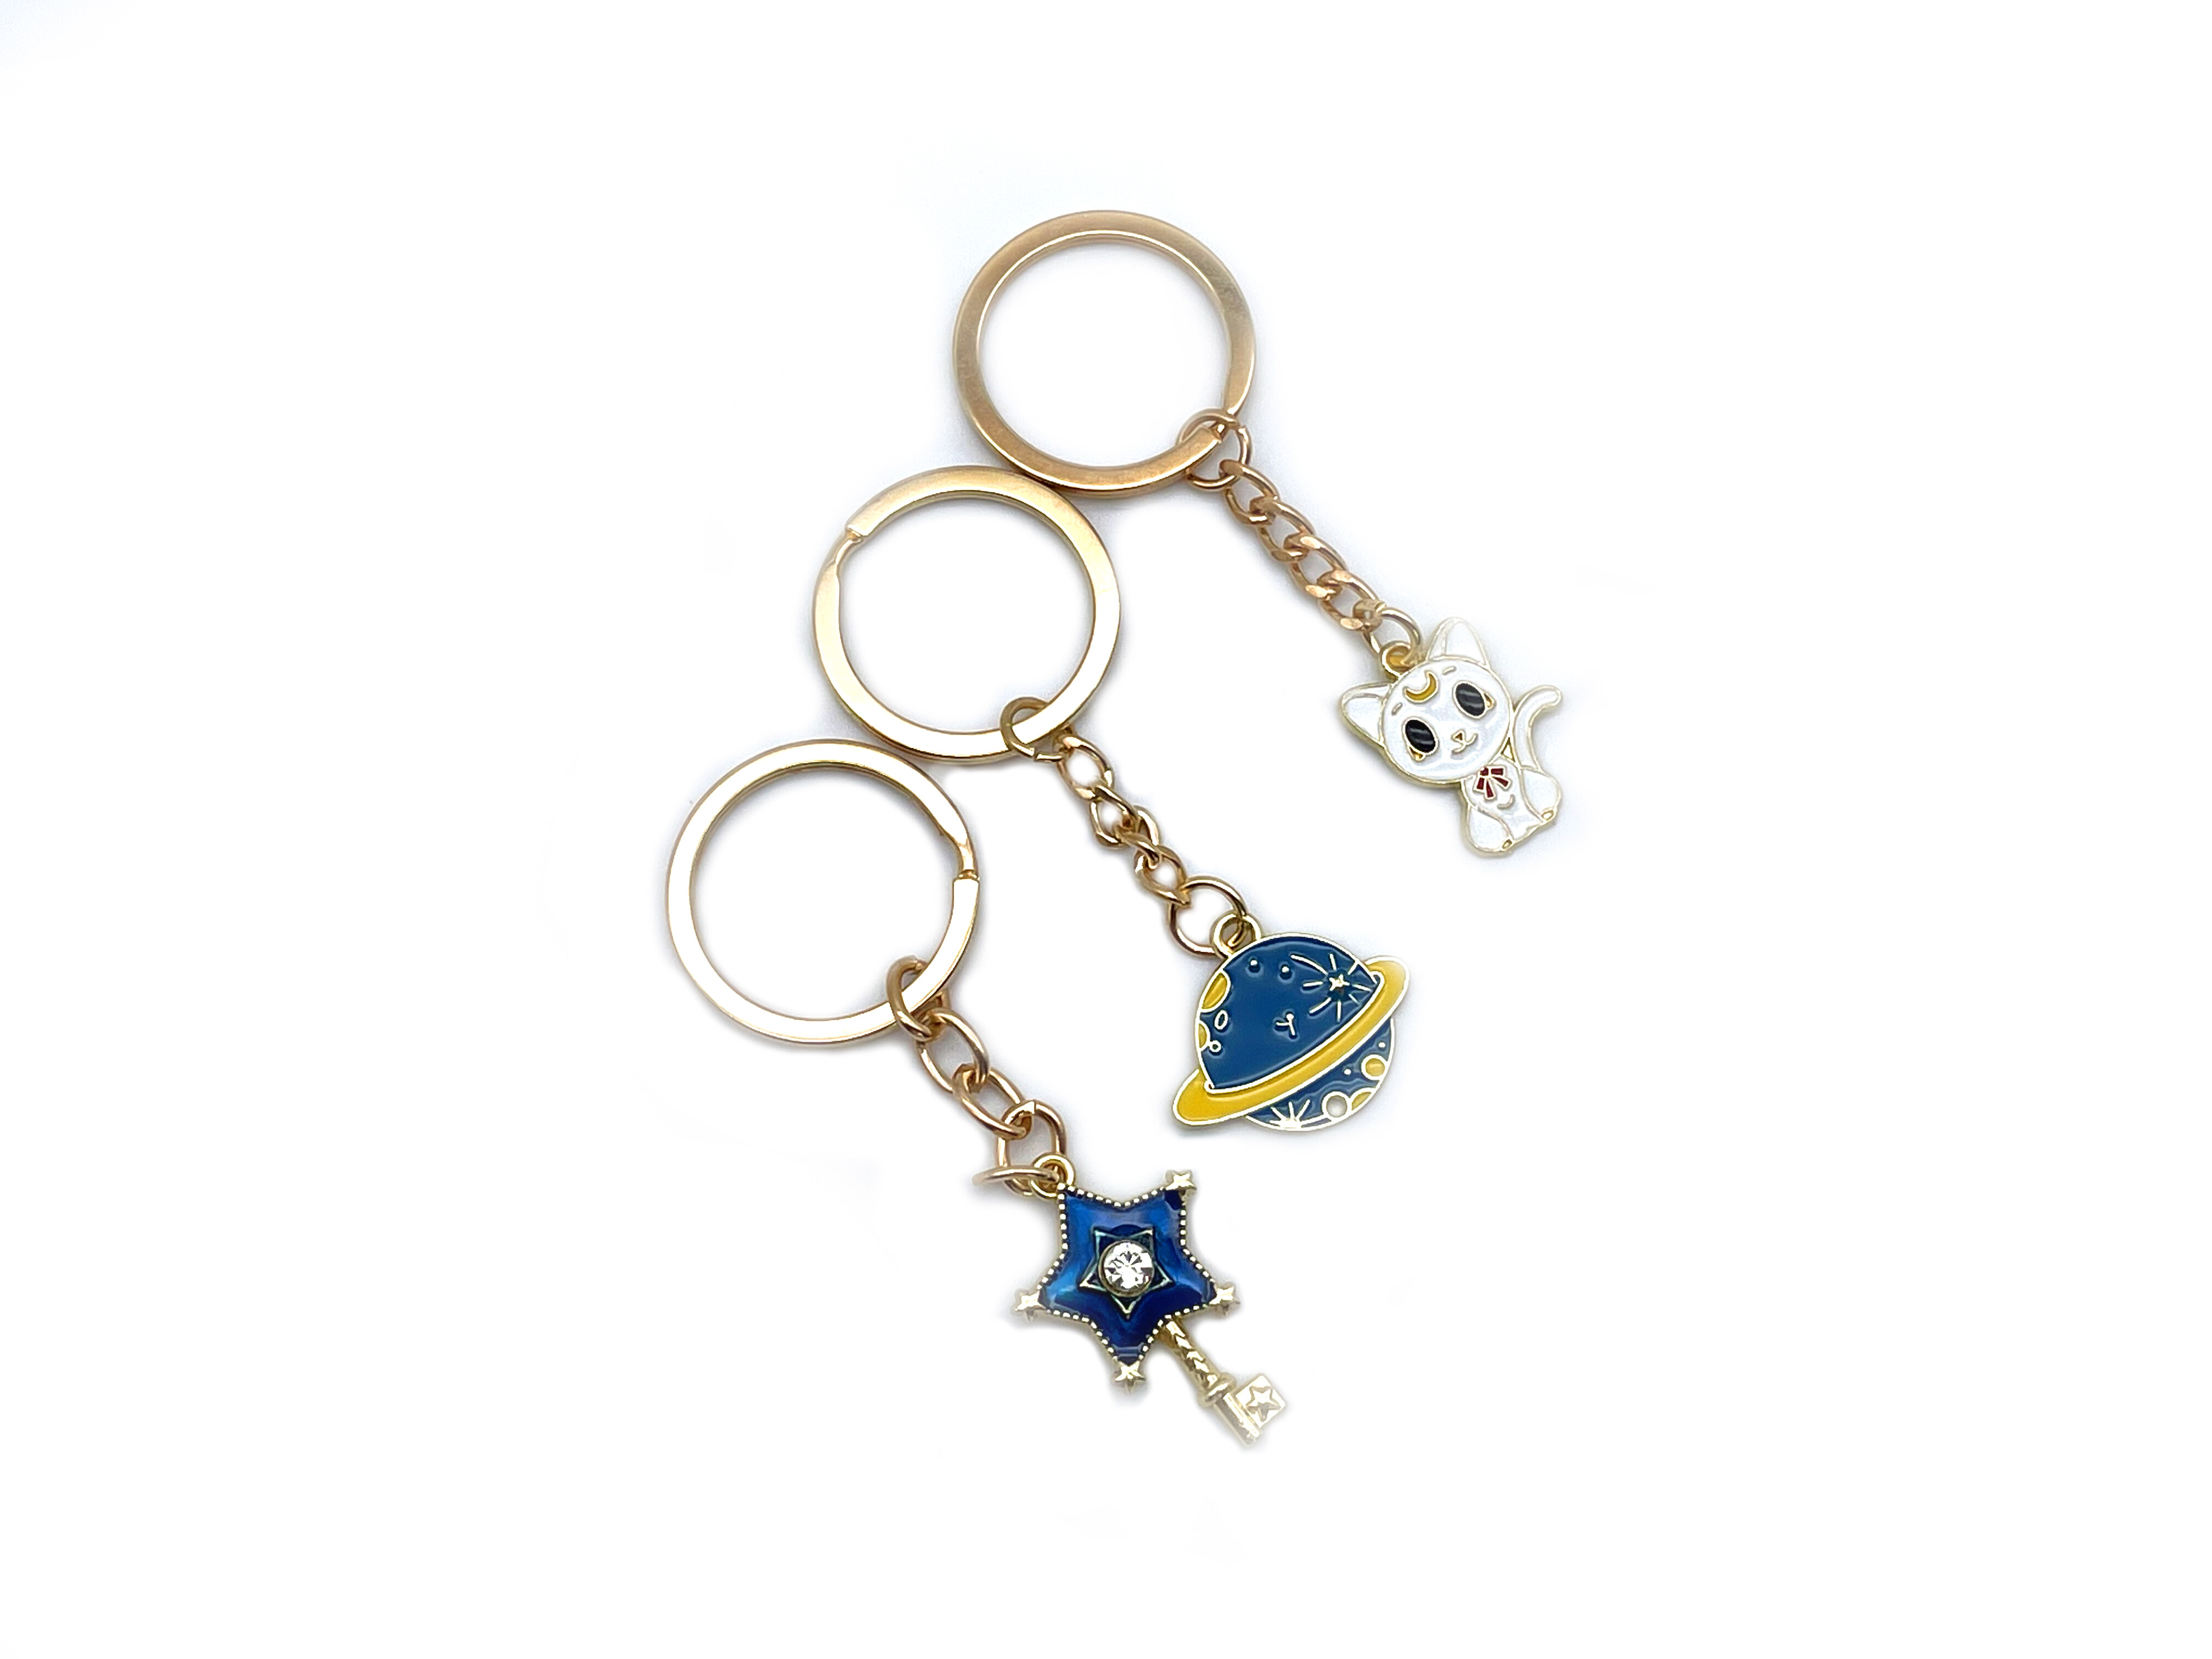 Key Chain Souvenirs: Memories and Keepsakes from Your Travels